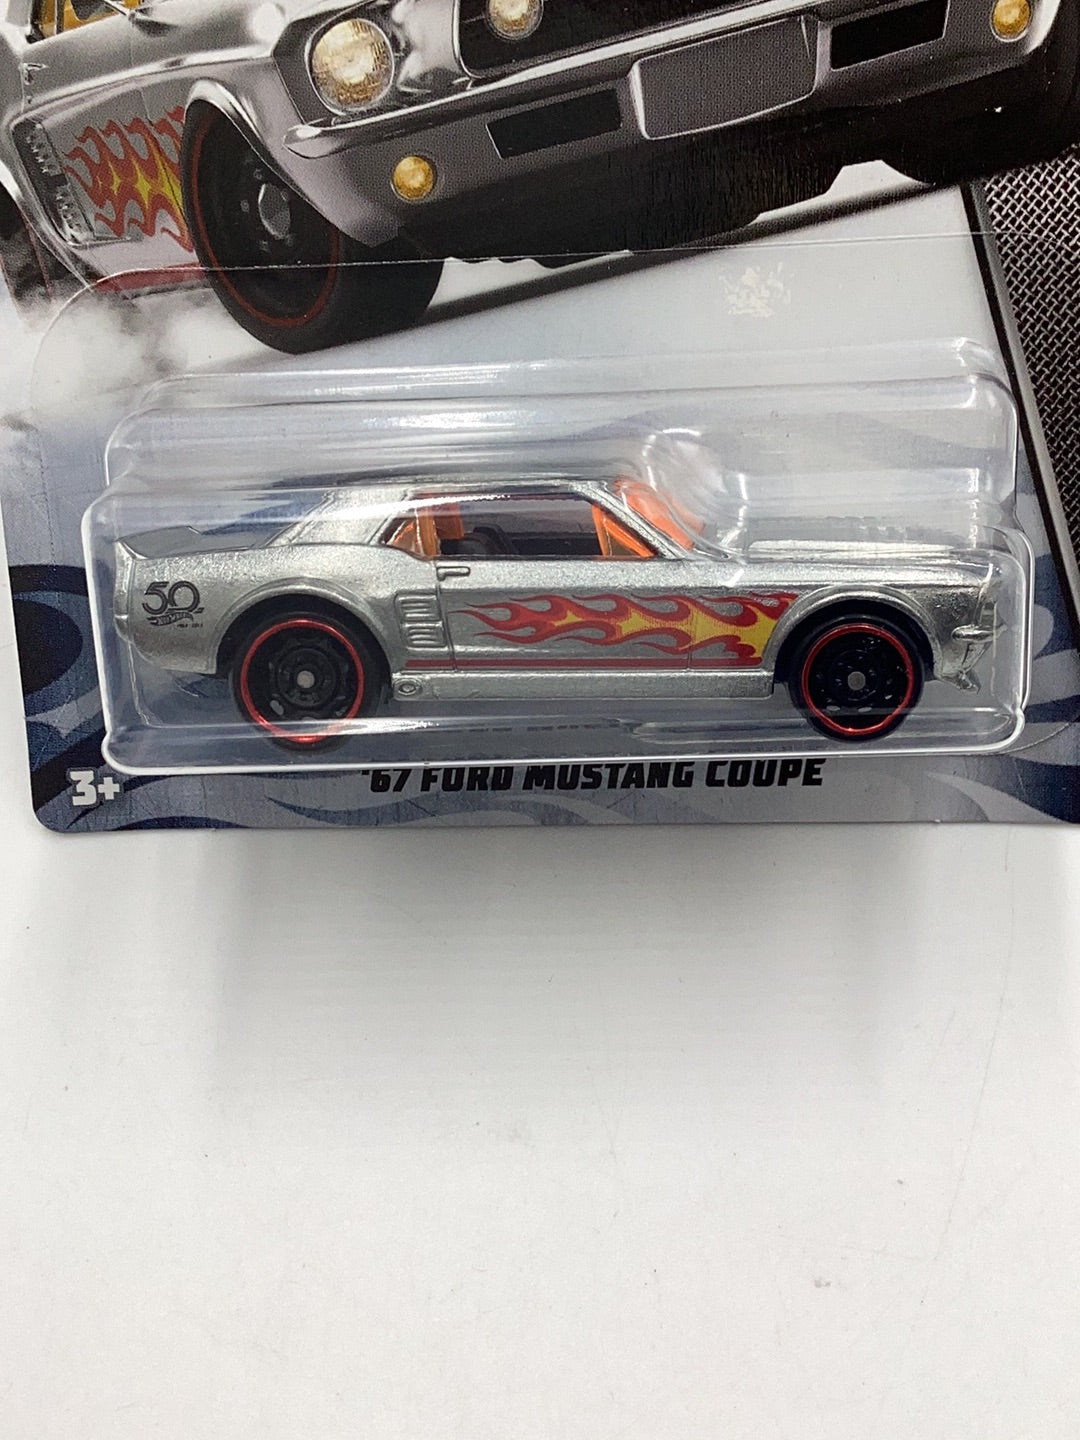 Hot Wheels Zamac Set 67 Ford Mustang Coupe 1/8 149A